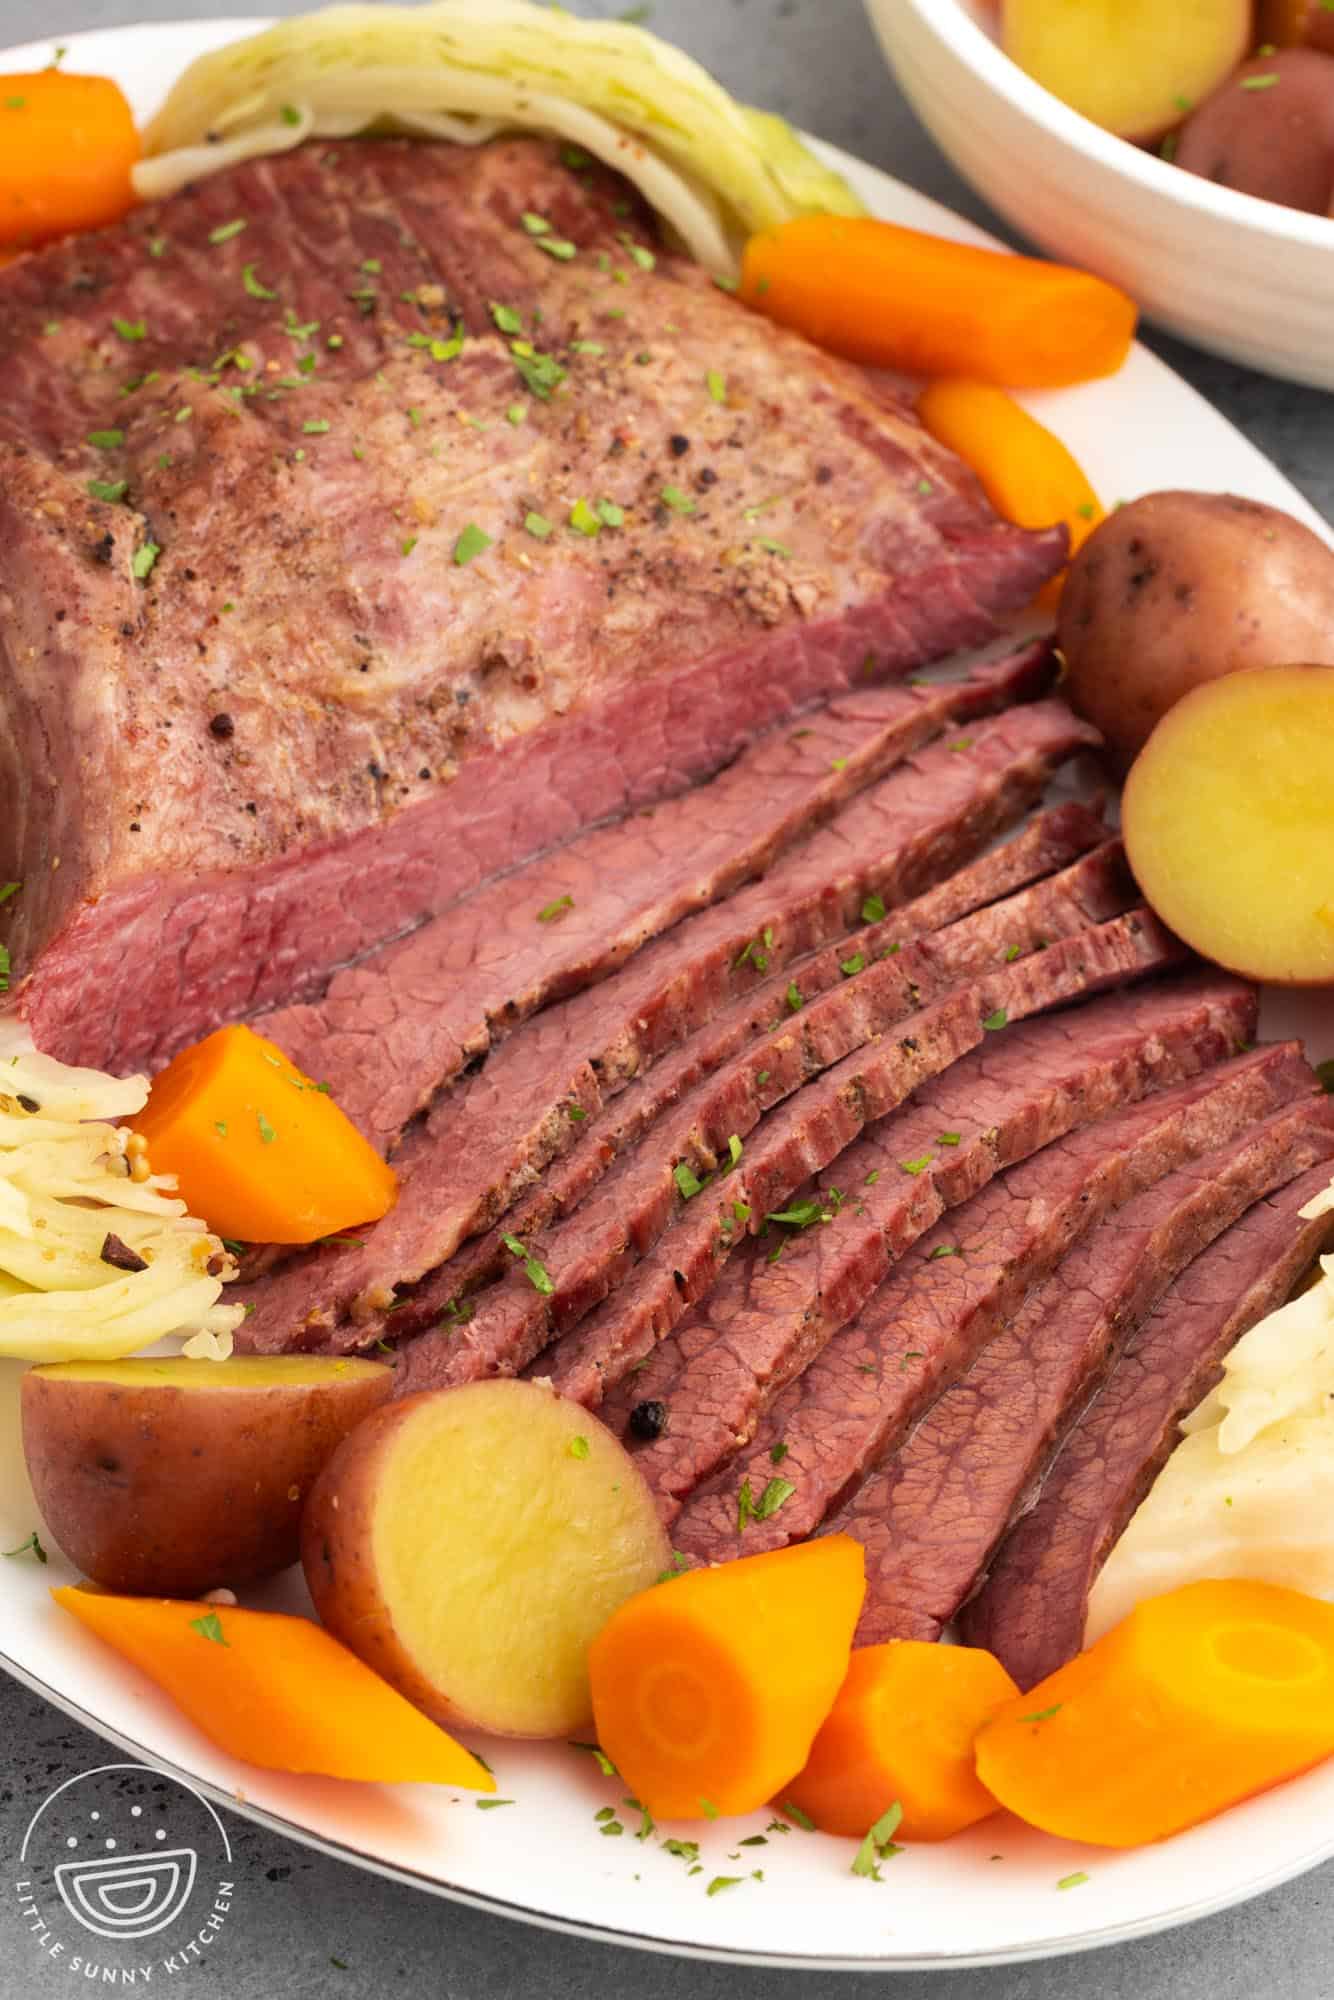 a platter of sliced corned beef with cabbage, carrots, and potatoes.